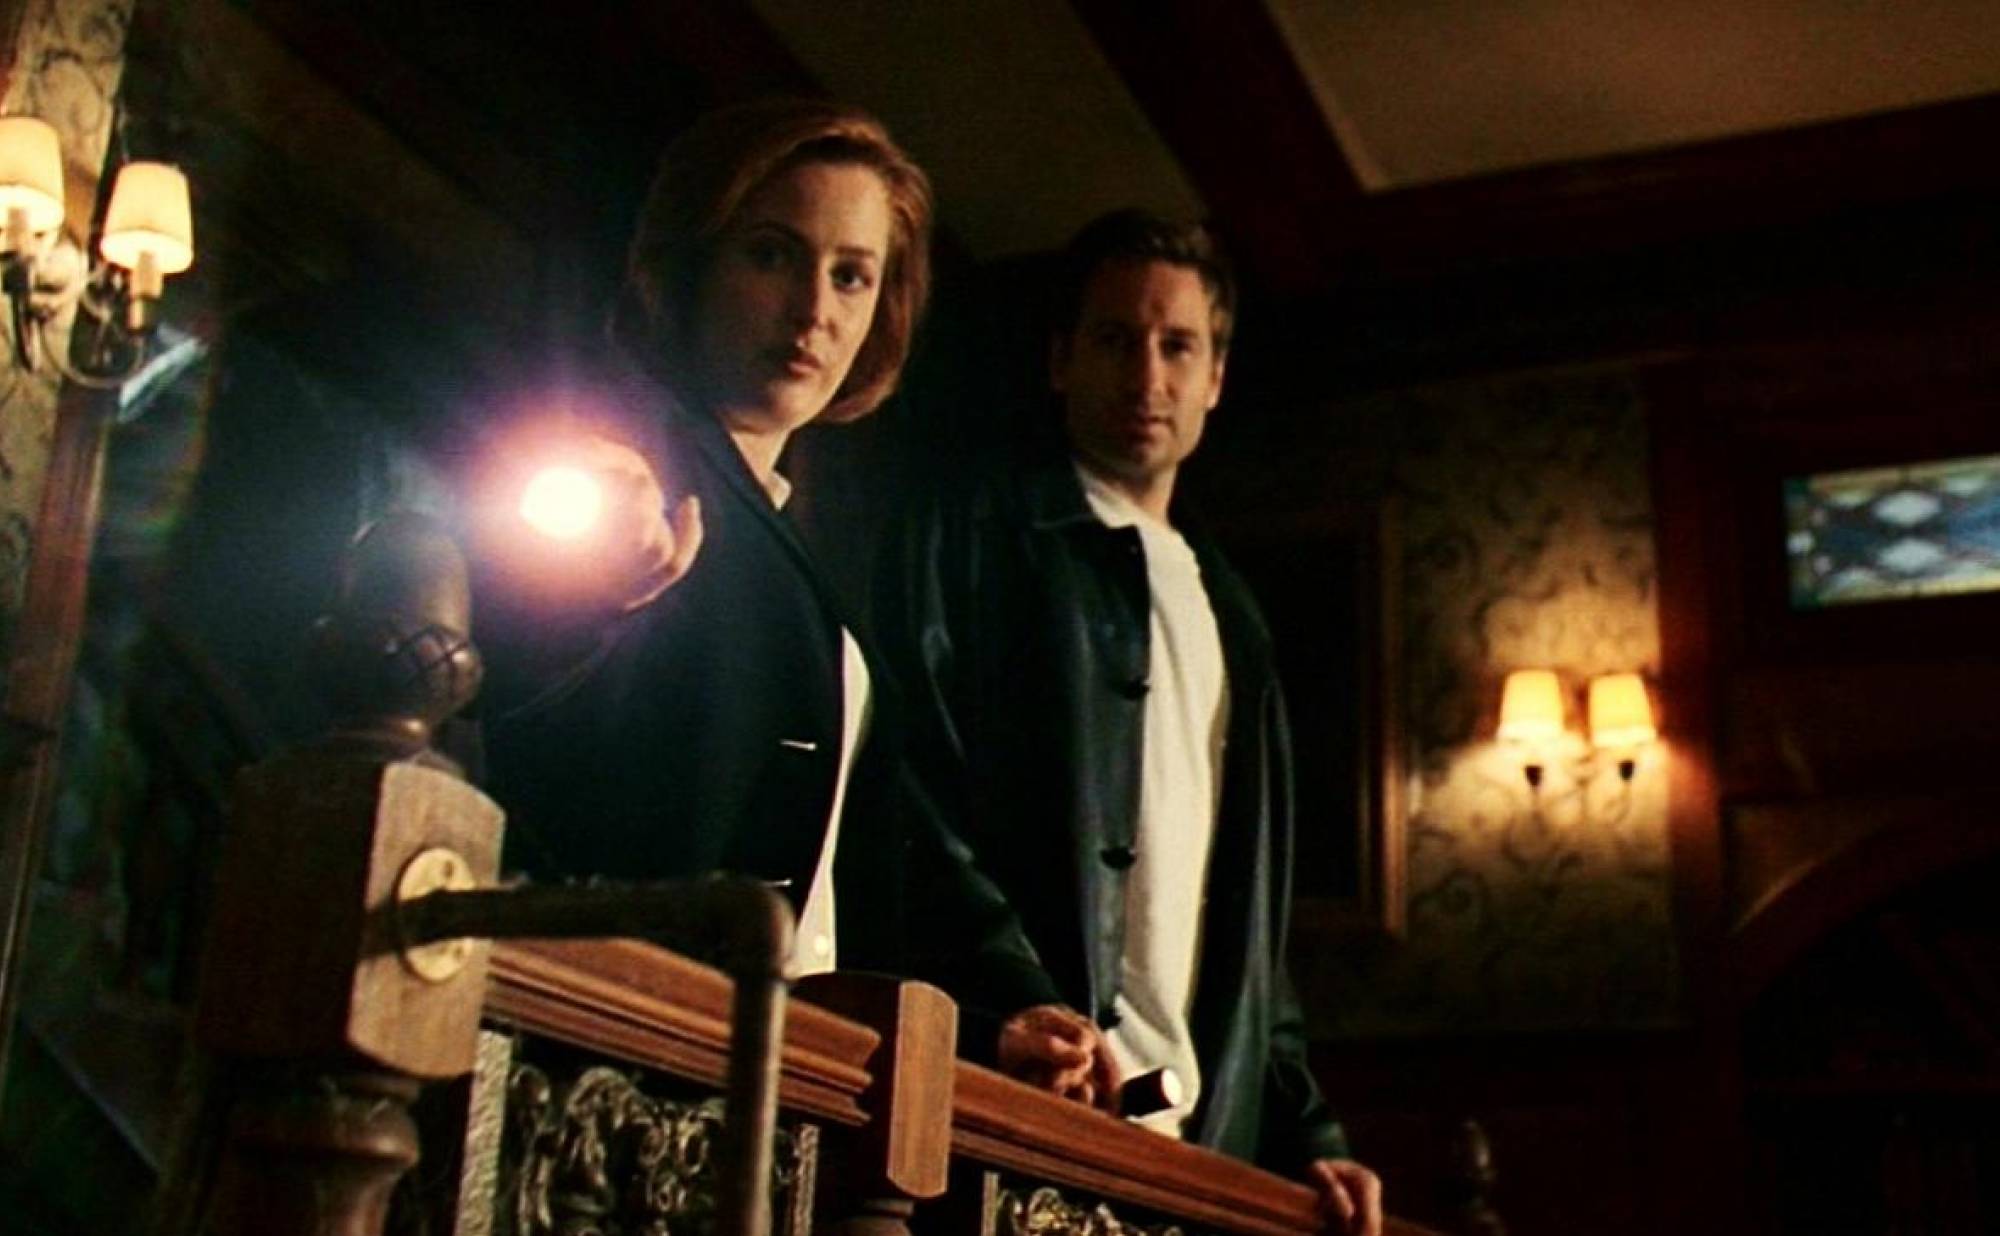 Mulder and Scully survey the scene